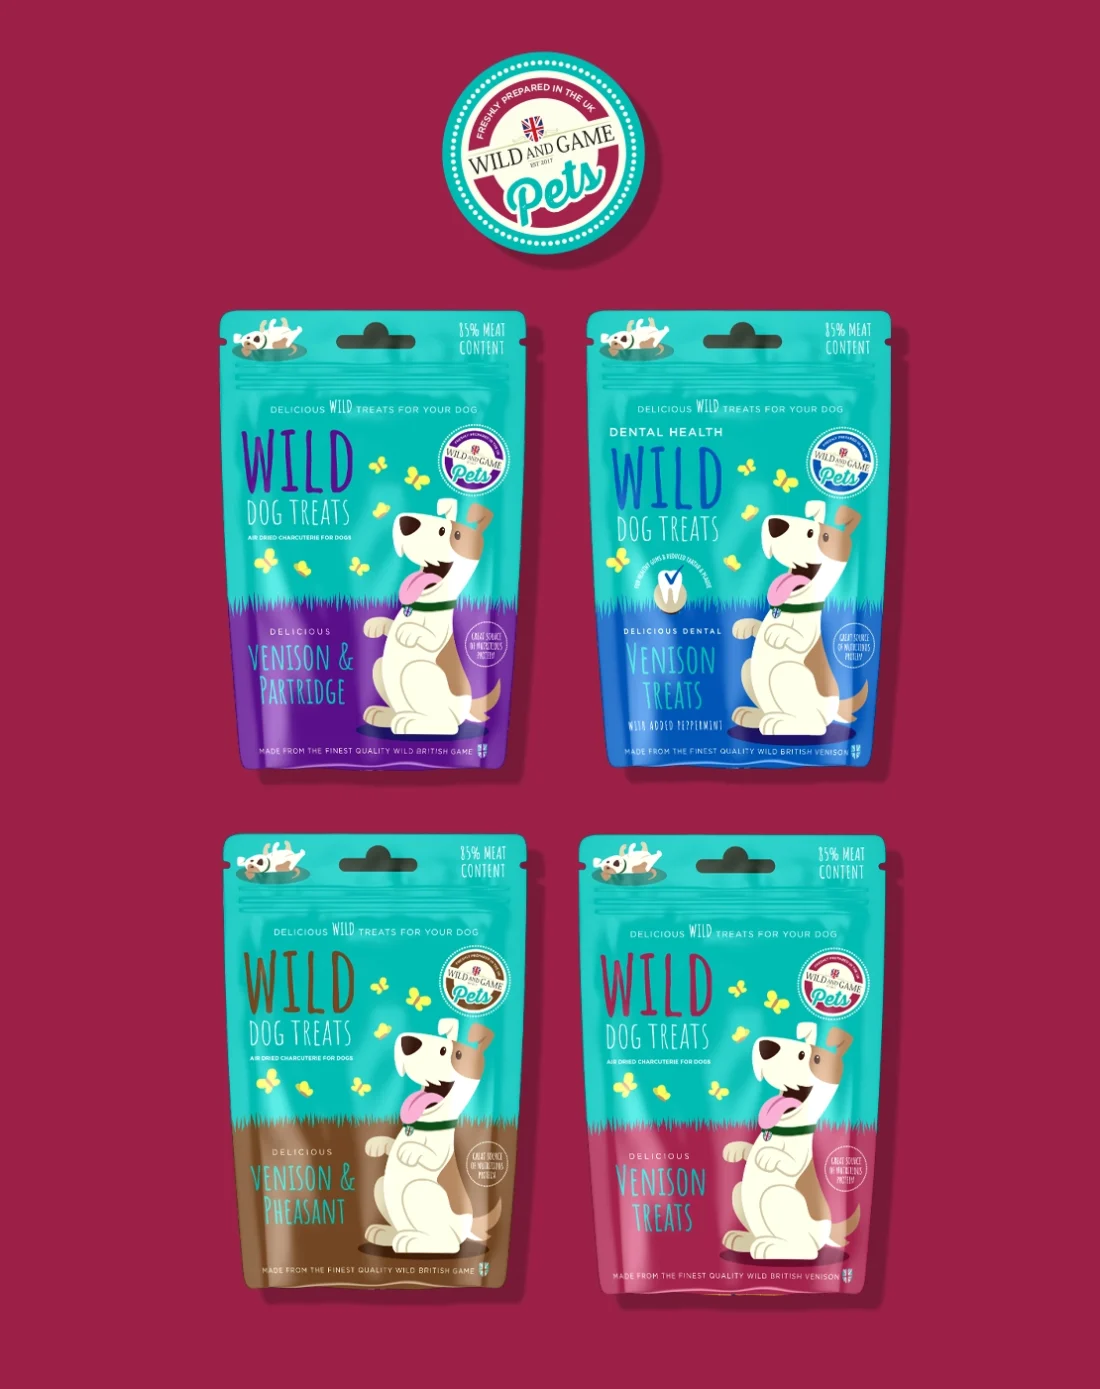 Wild and game pet food packaging design